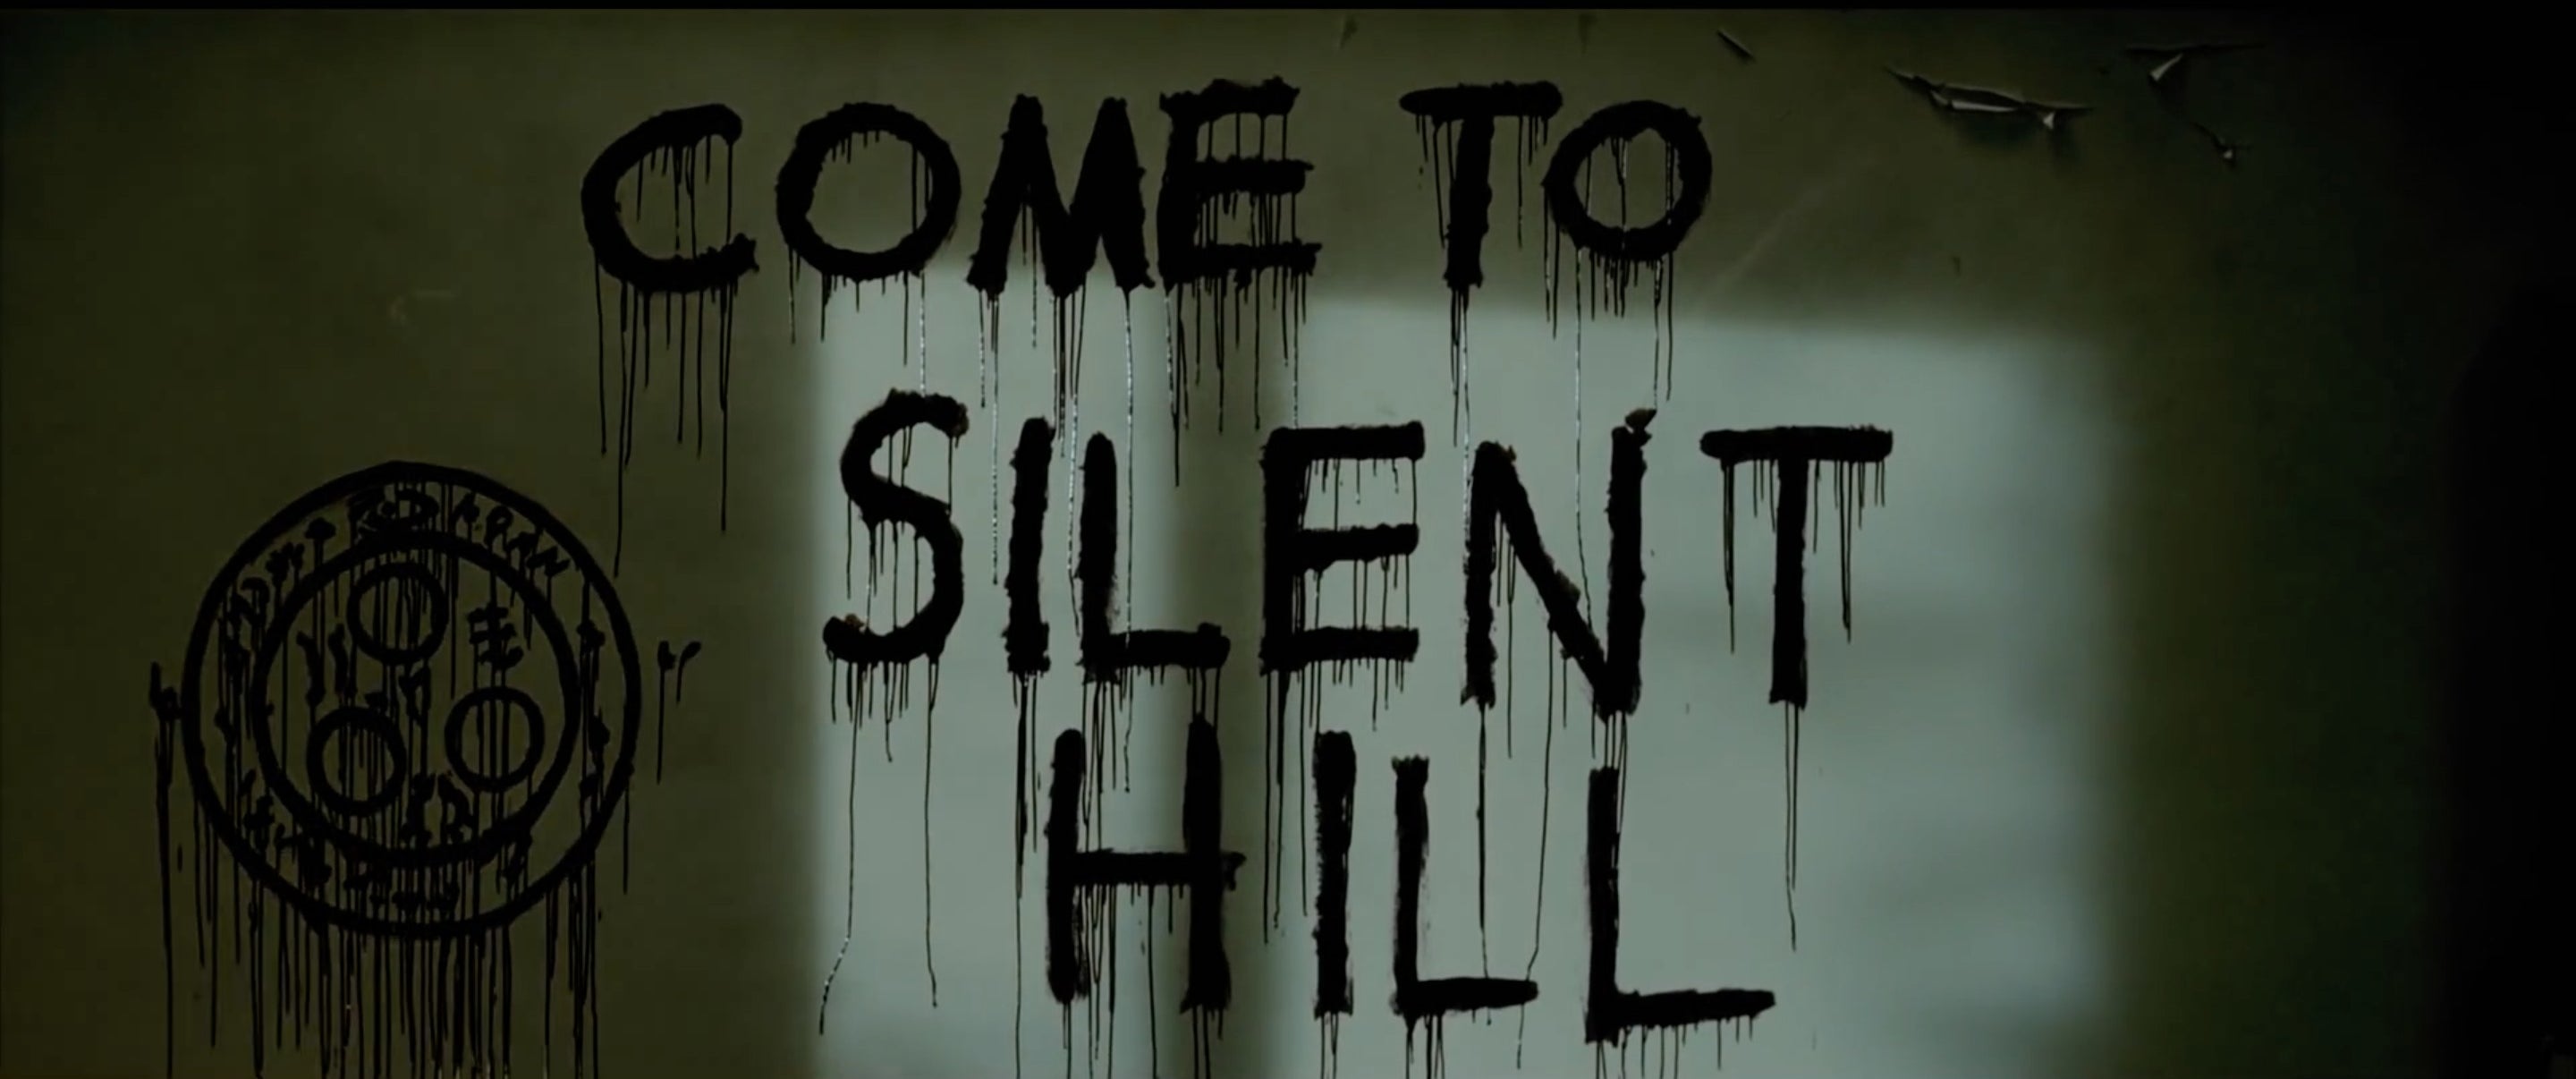 &quot;Come to SIlent Hill&quot; in dripping paint